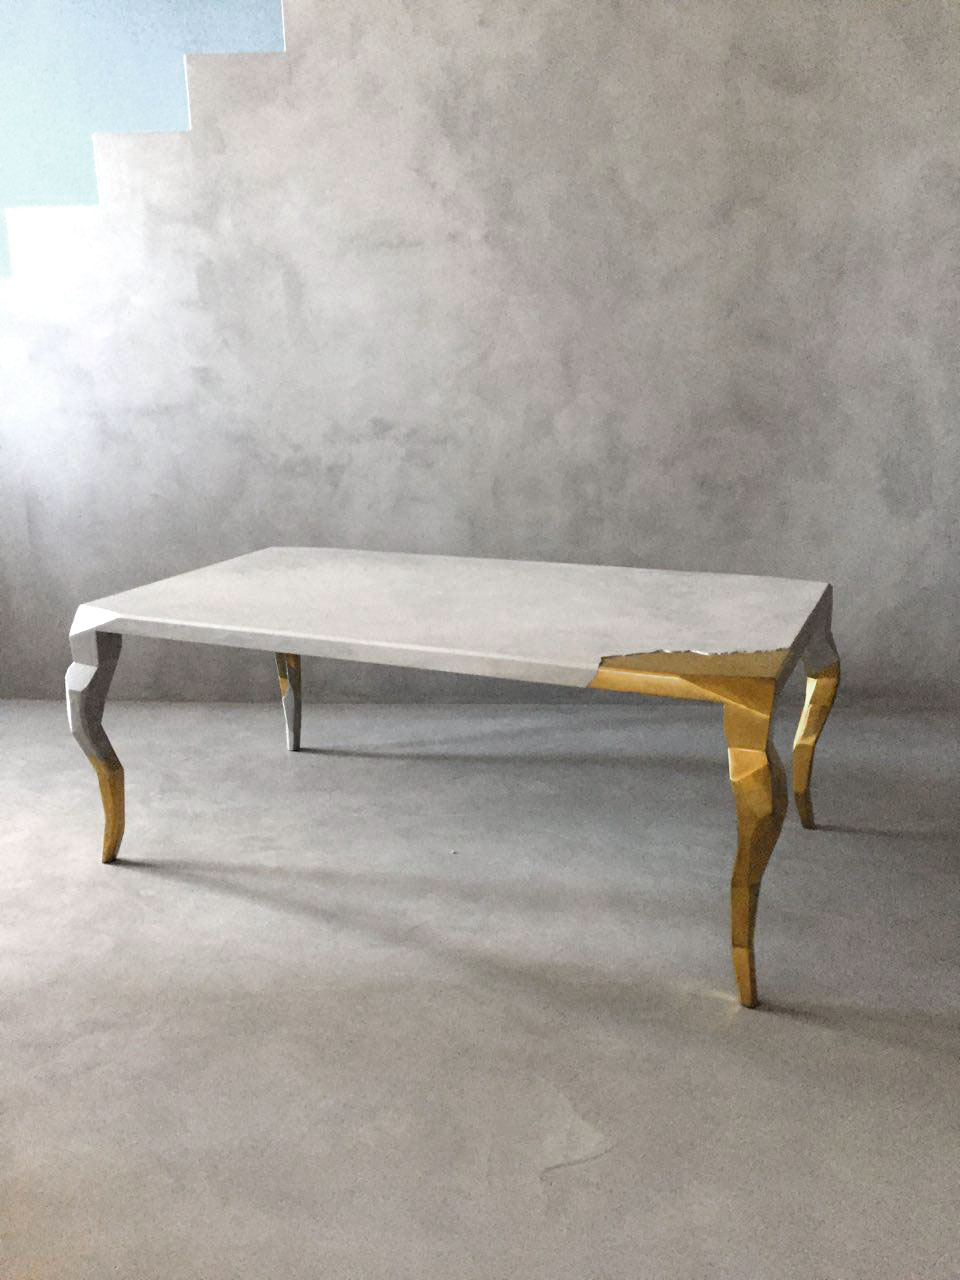 Golden and white microcement furniture